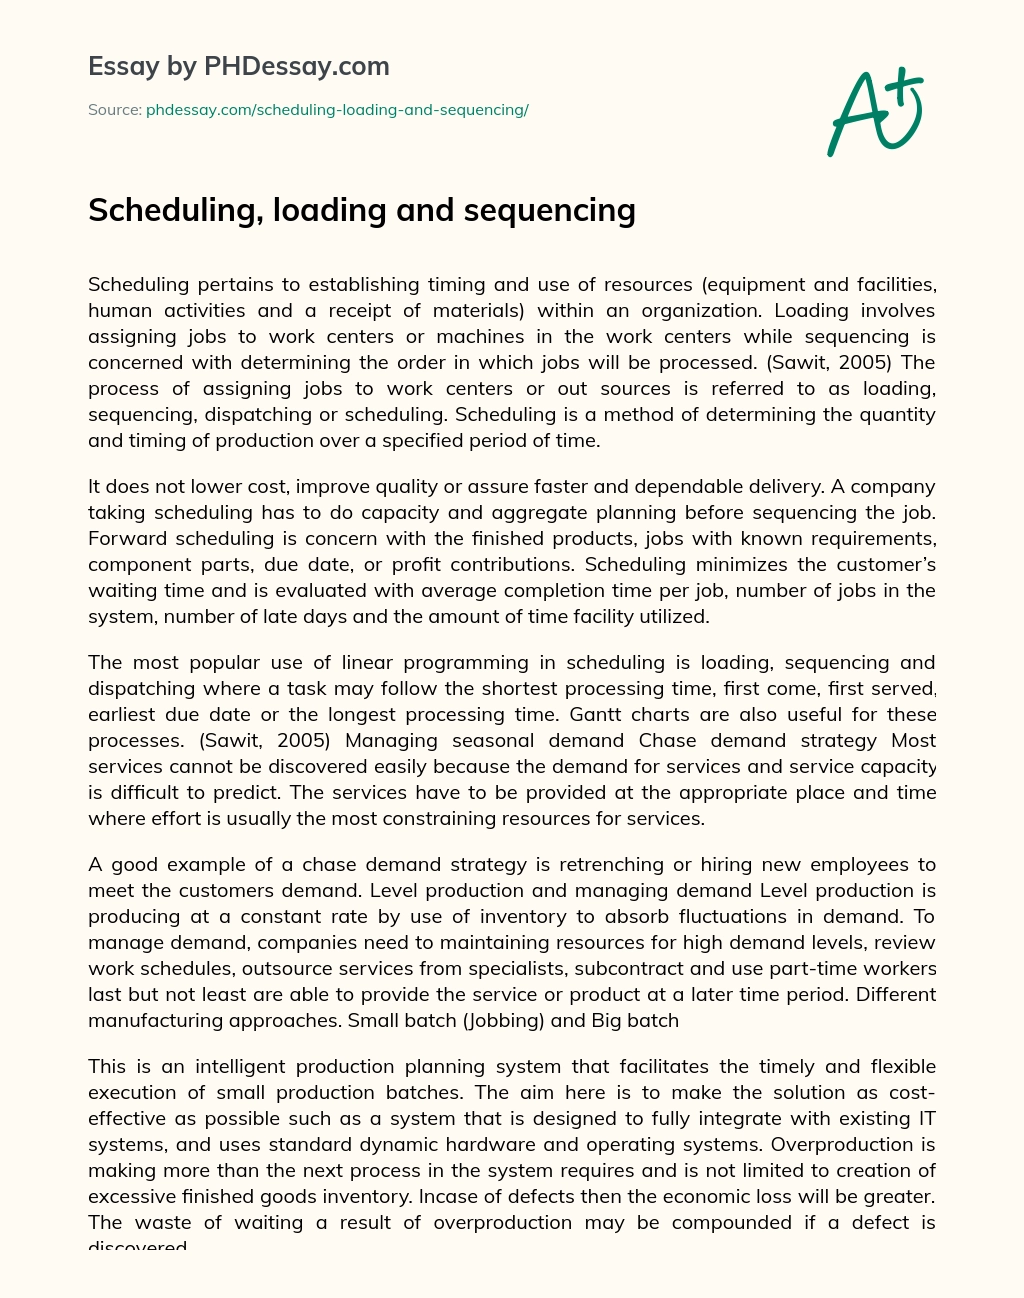 Scheduling, loading and sequencing essay